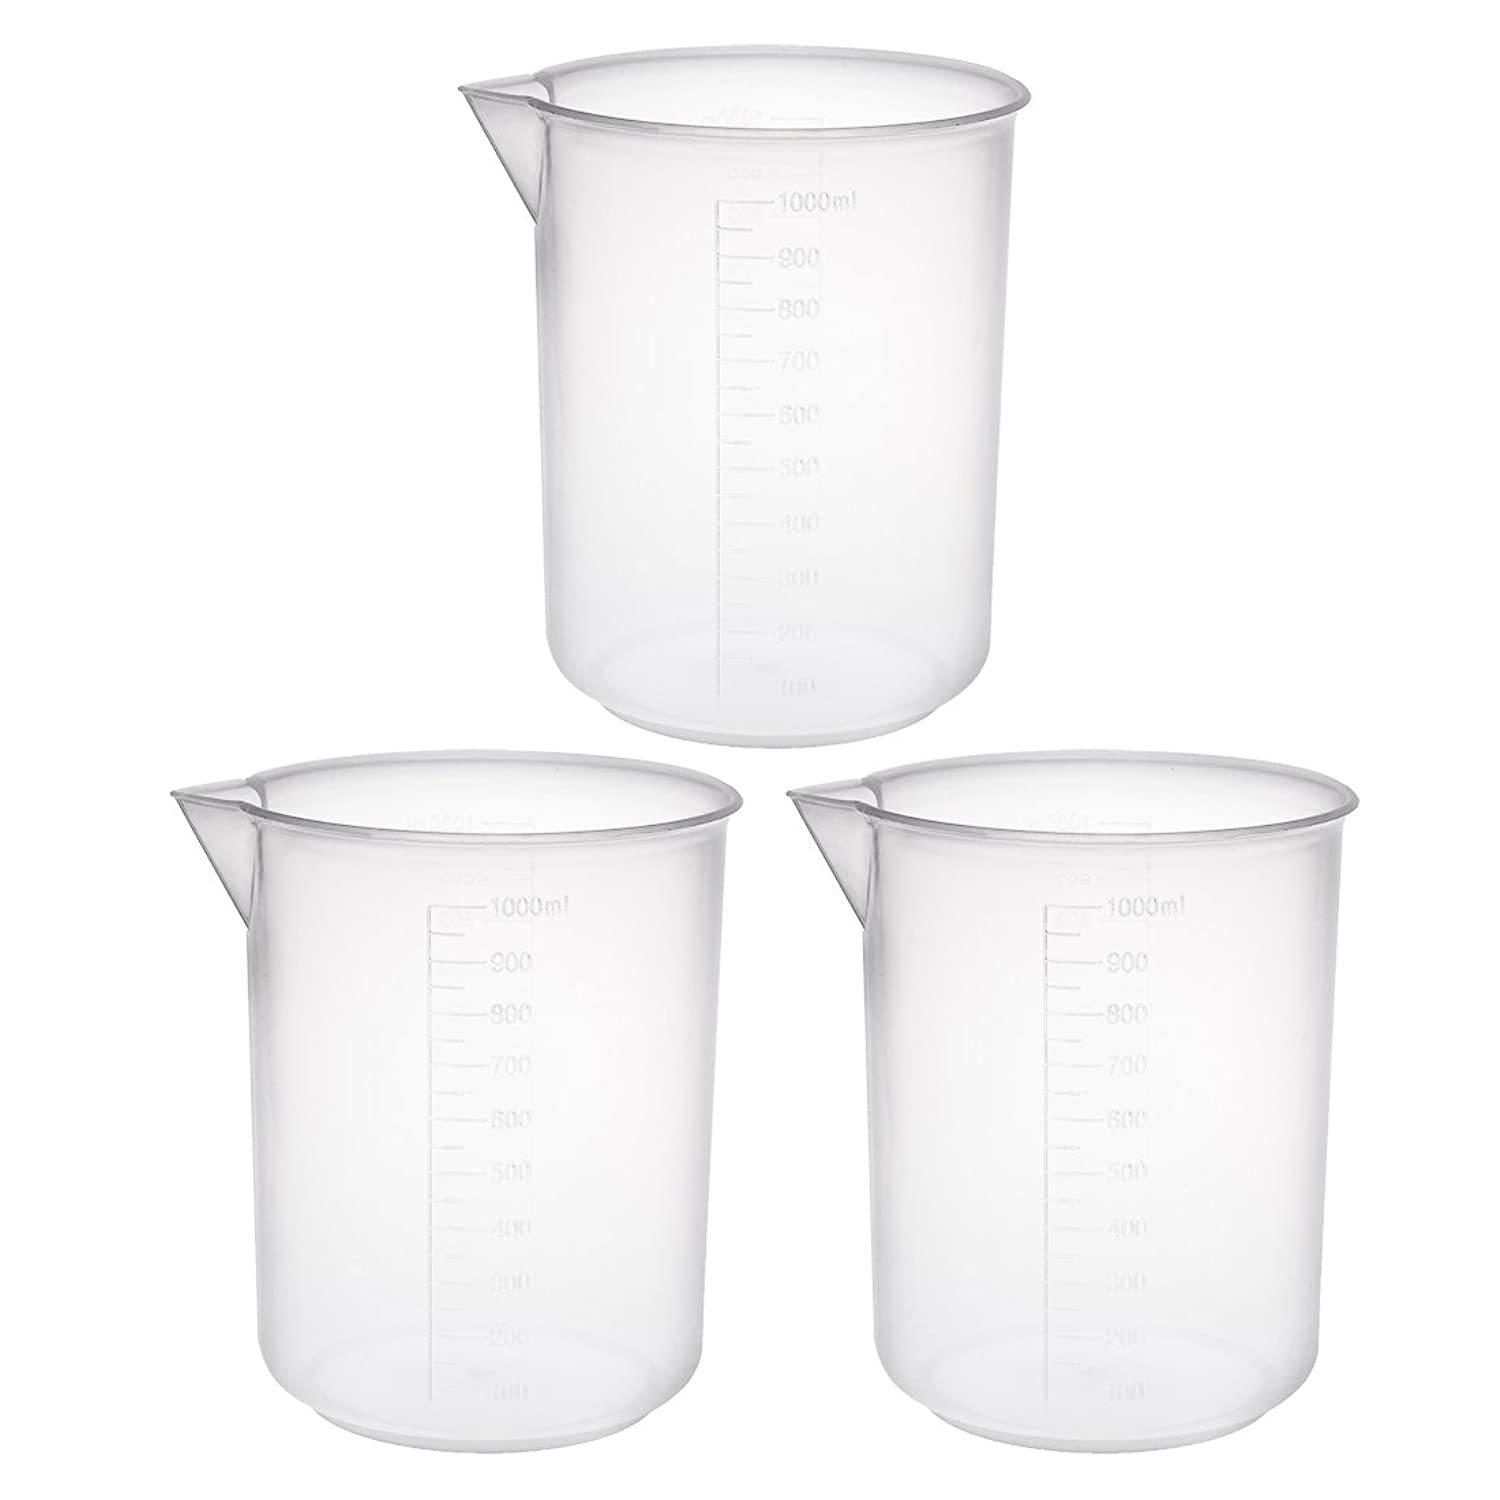 Norpro Adjustable Measuring Cup, One Size, As Shown